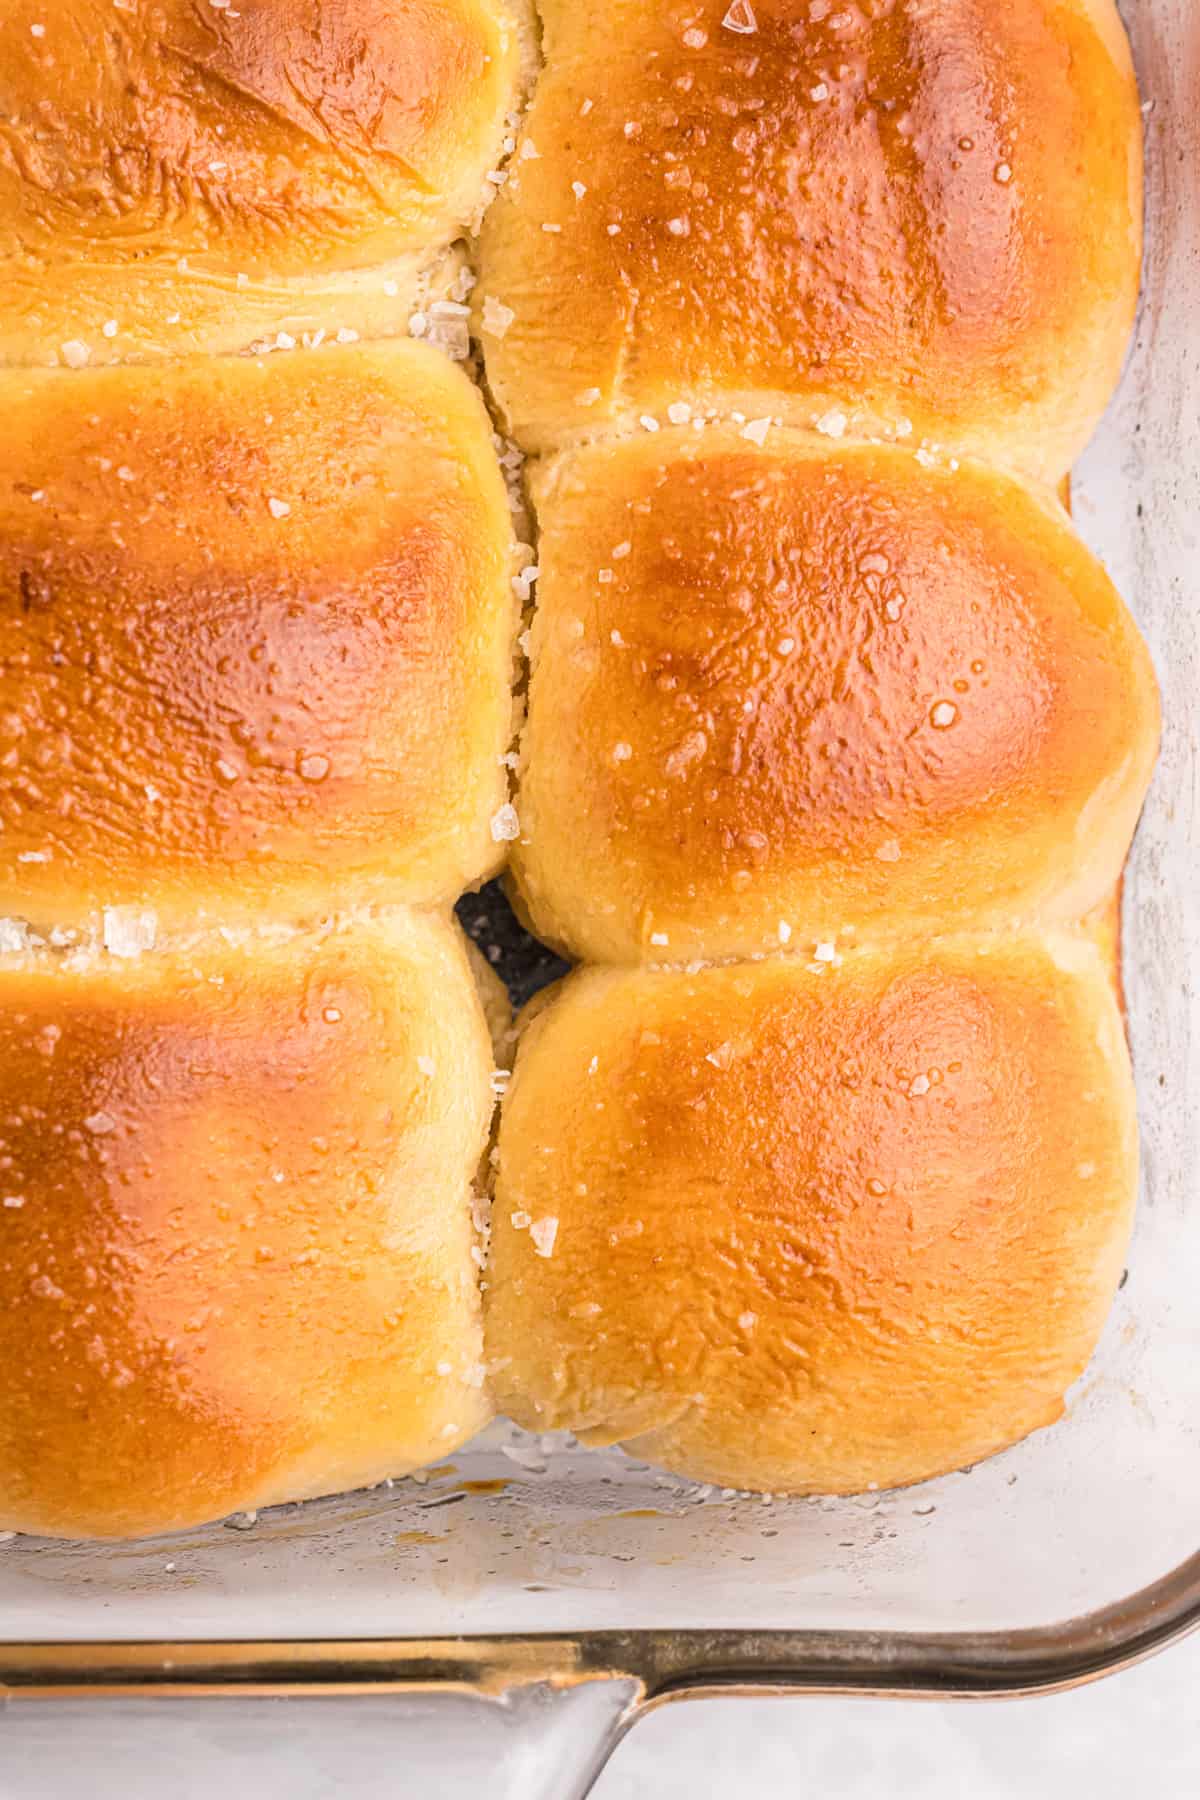 Baked rolls are golden brown and sprinkled with sea salt.